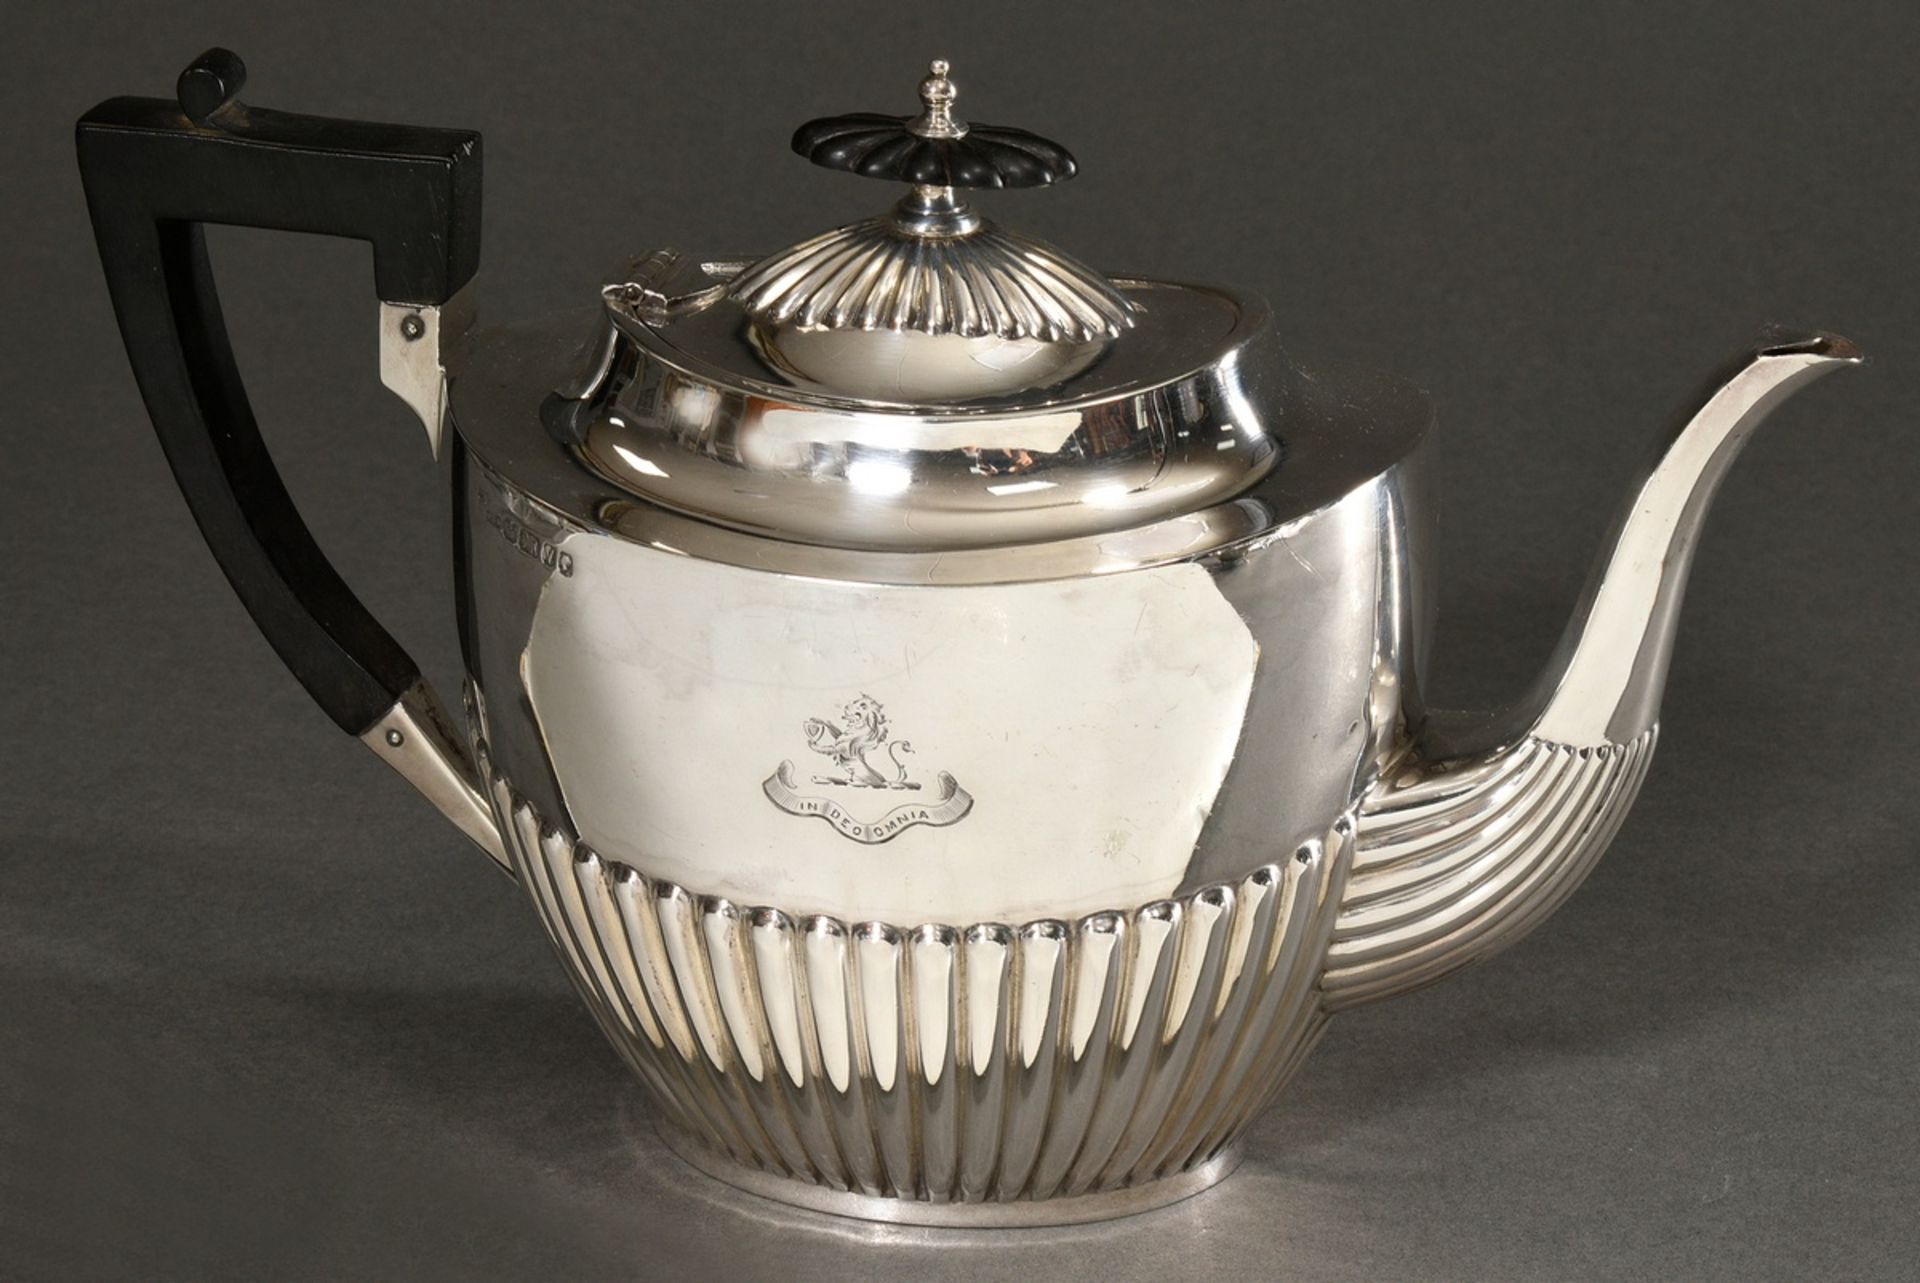 Queen Ann style teapot with engraved motto "In Deo Omnia" and blackened wooden handle, MM: John Edw